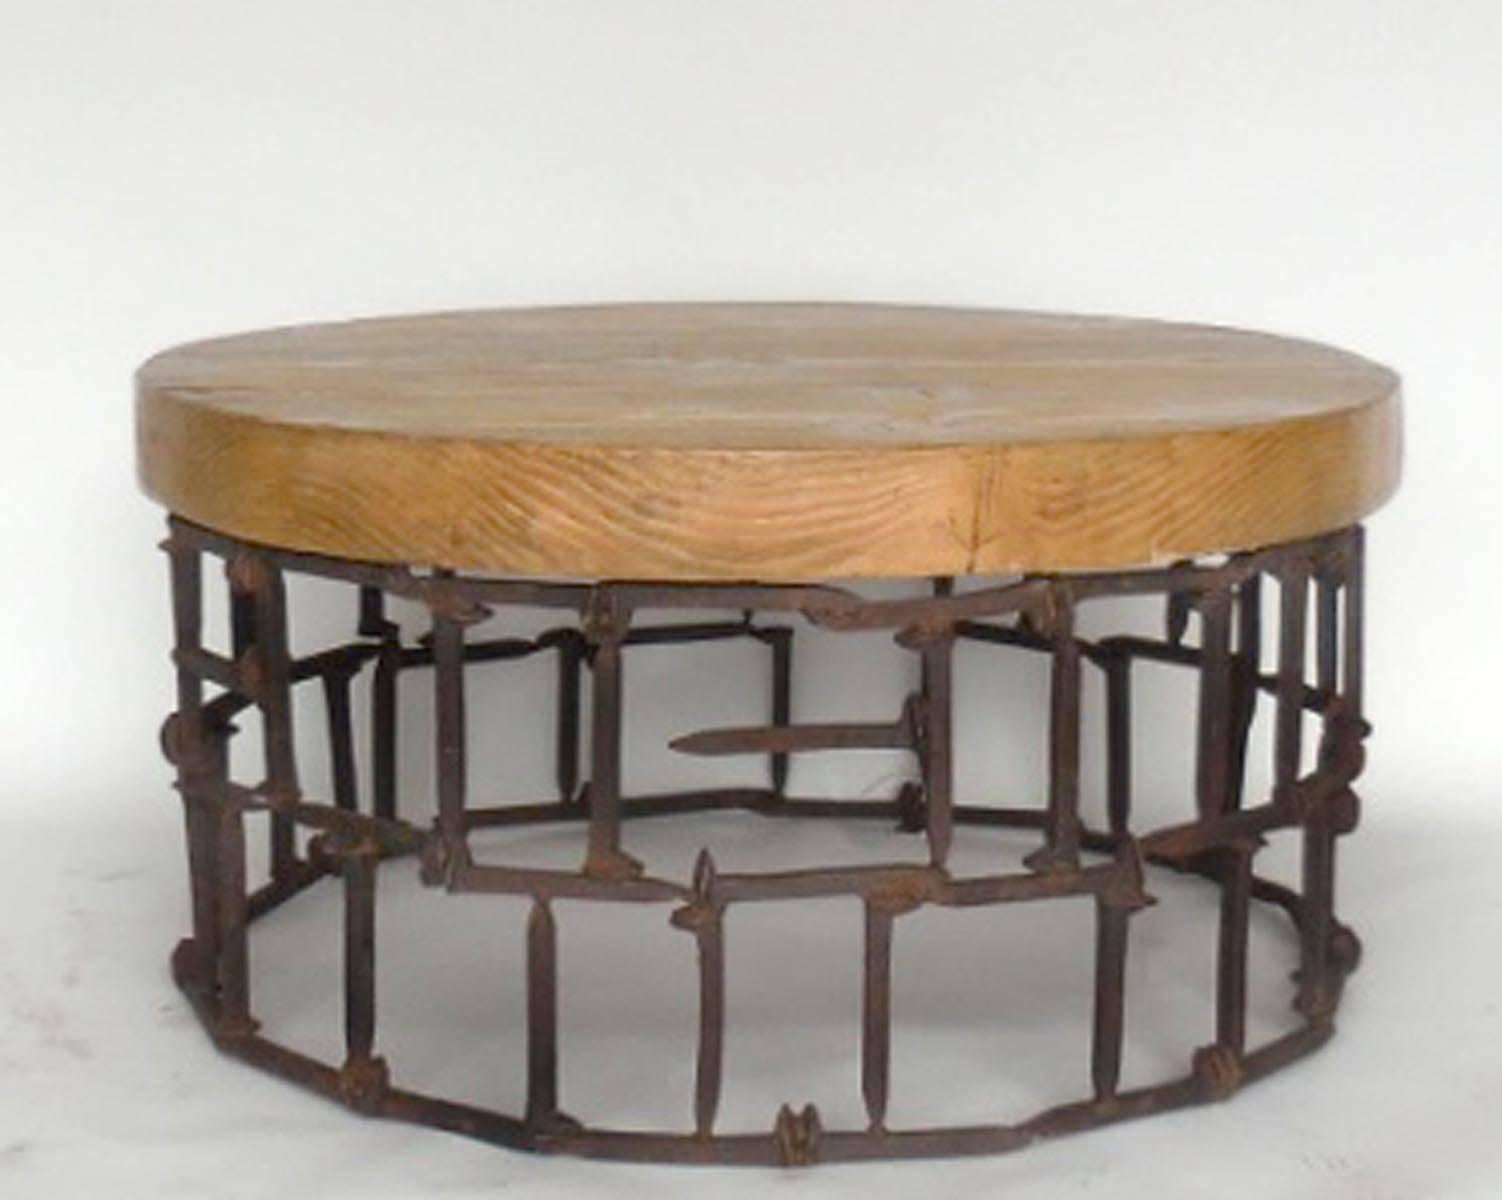 Antique rail road spikes fashioned into a circular base with a 3.5 inch thick reclaimed wood top in a light 